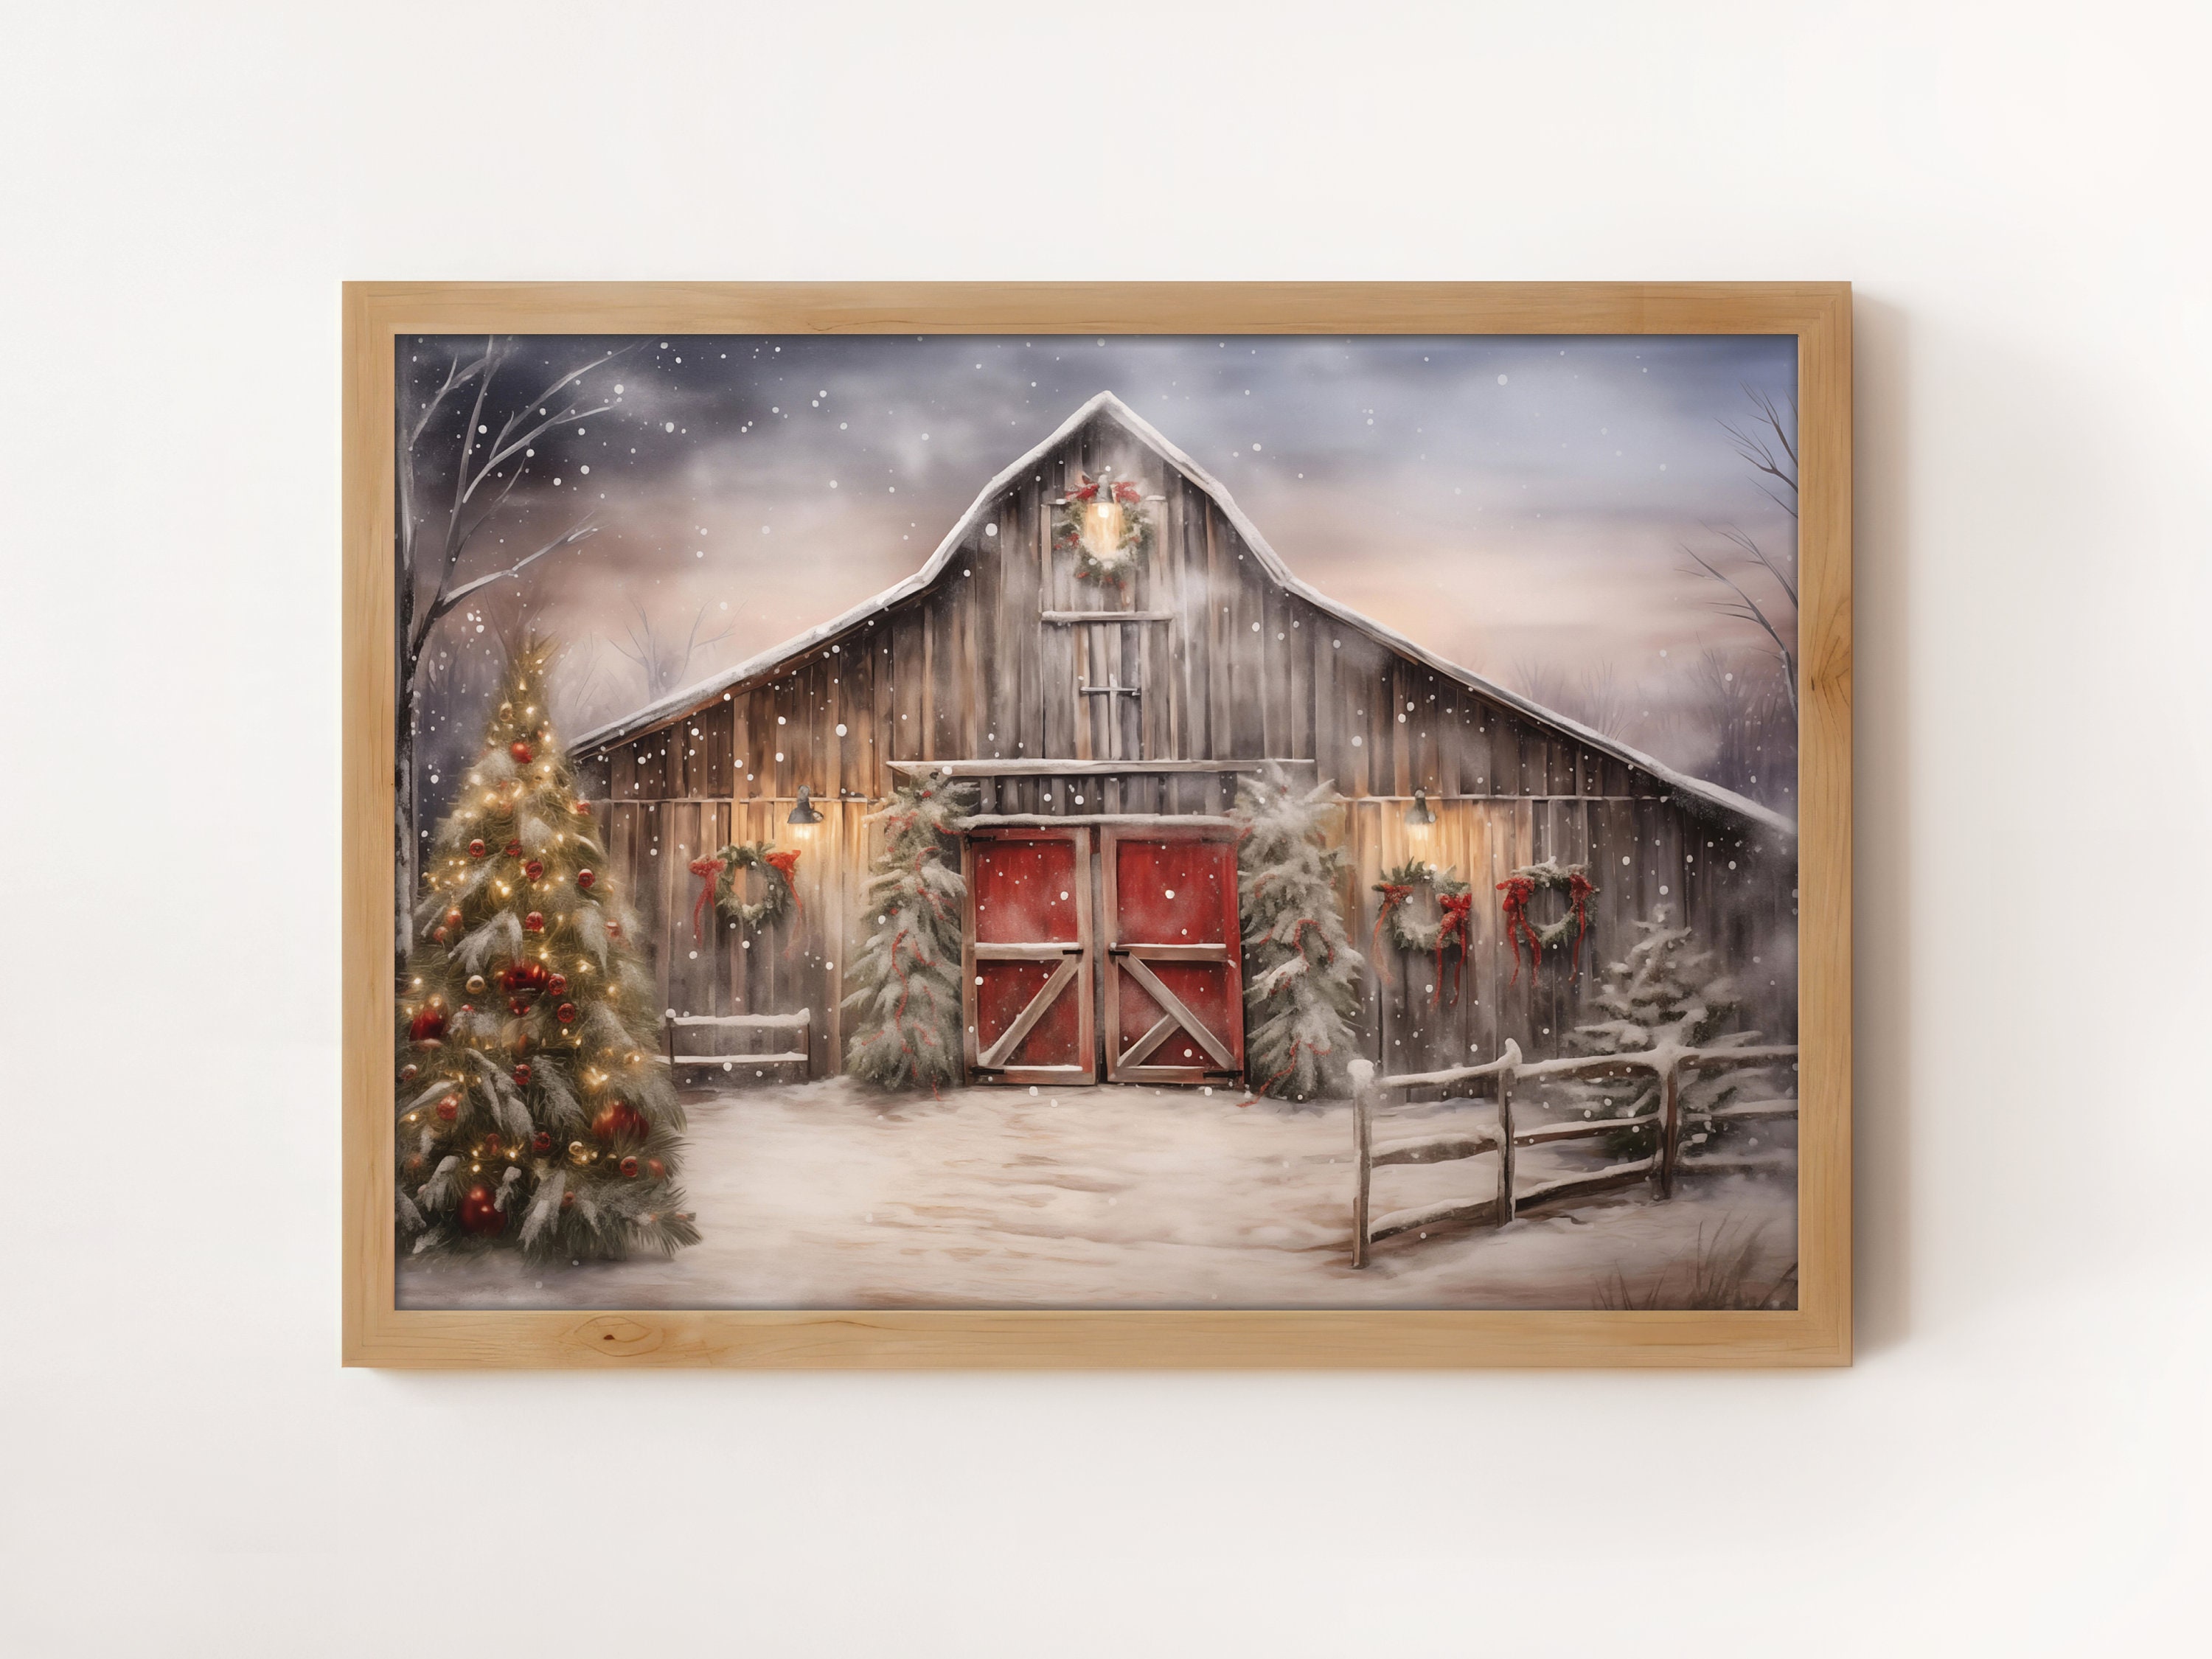 Old Rustic Barn Canvas, Framed, Metal, or Acrylic Free Shipping Free 8x8  Canvas With Any Purchase see Personalization Field 